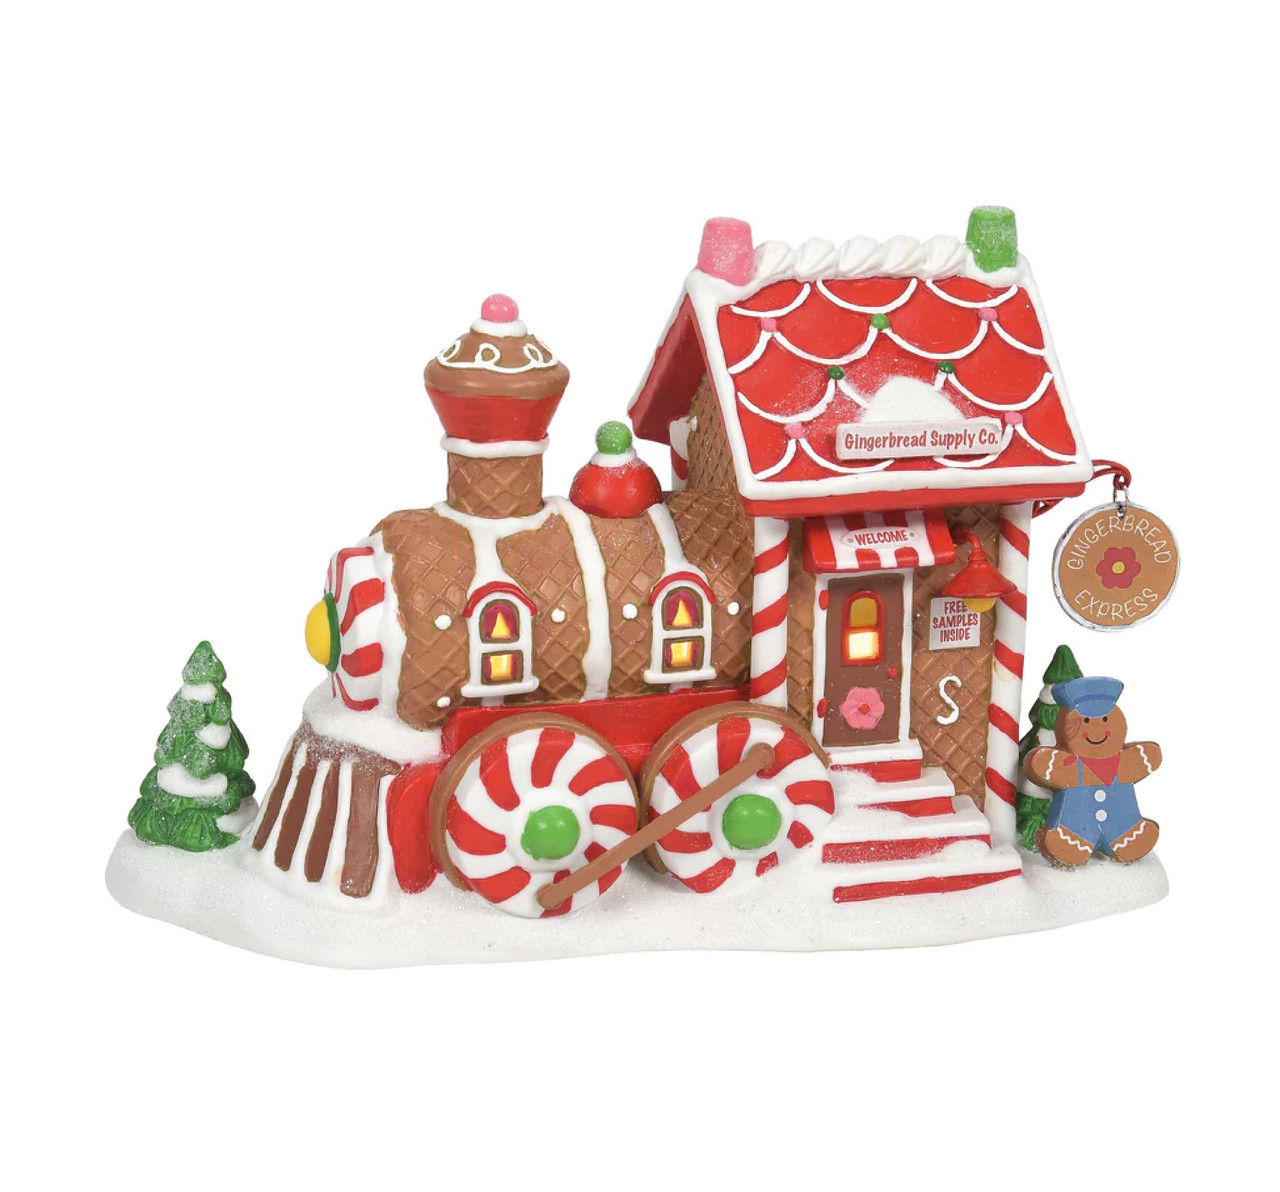 Department 56 Lighted Christmas Gingerbread Supply Company #6011413  Christmas